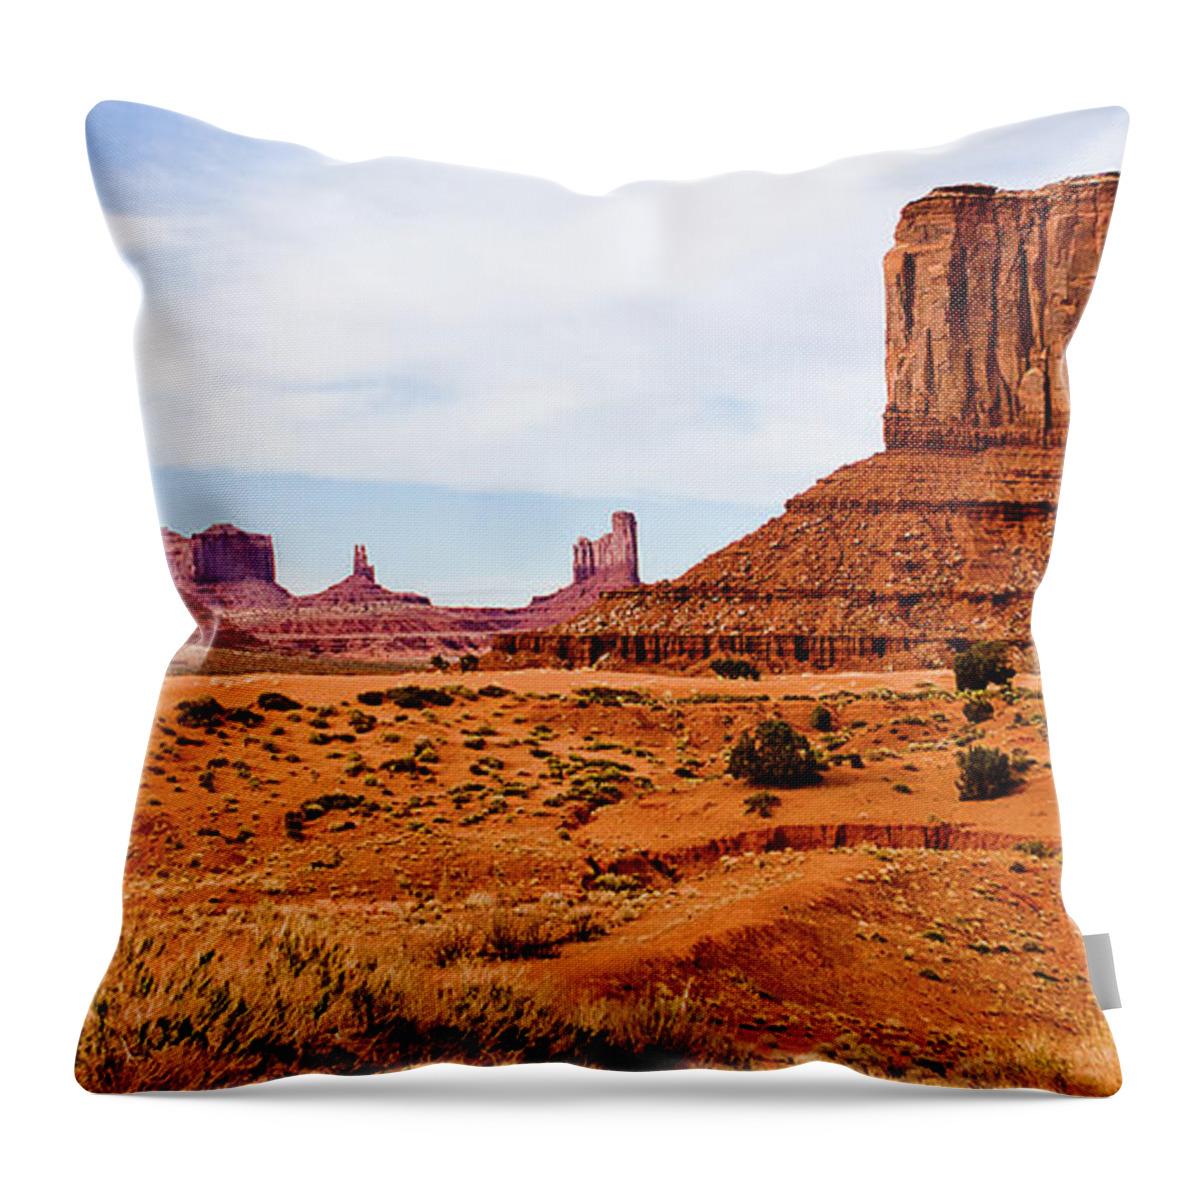 The Mittens Throw Pillow featuring the photograph The Mitten by Peter Tellone